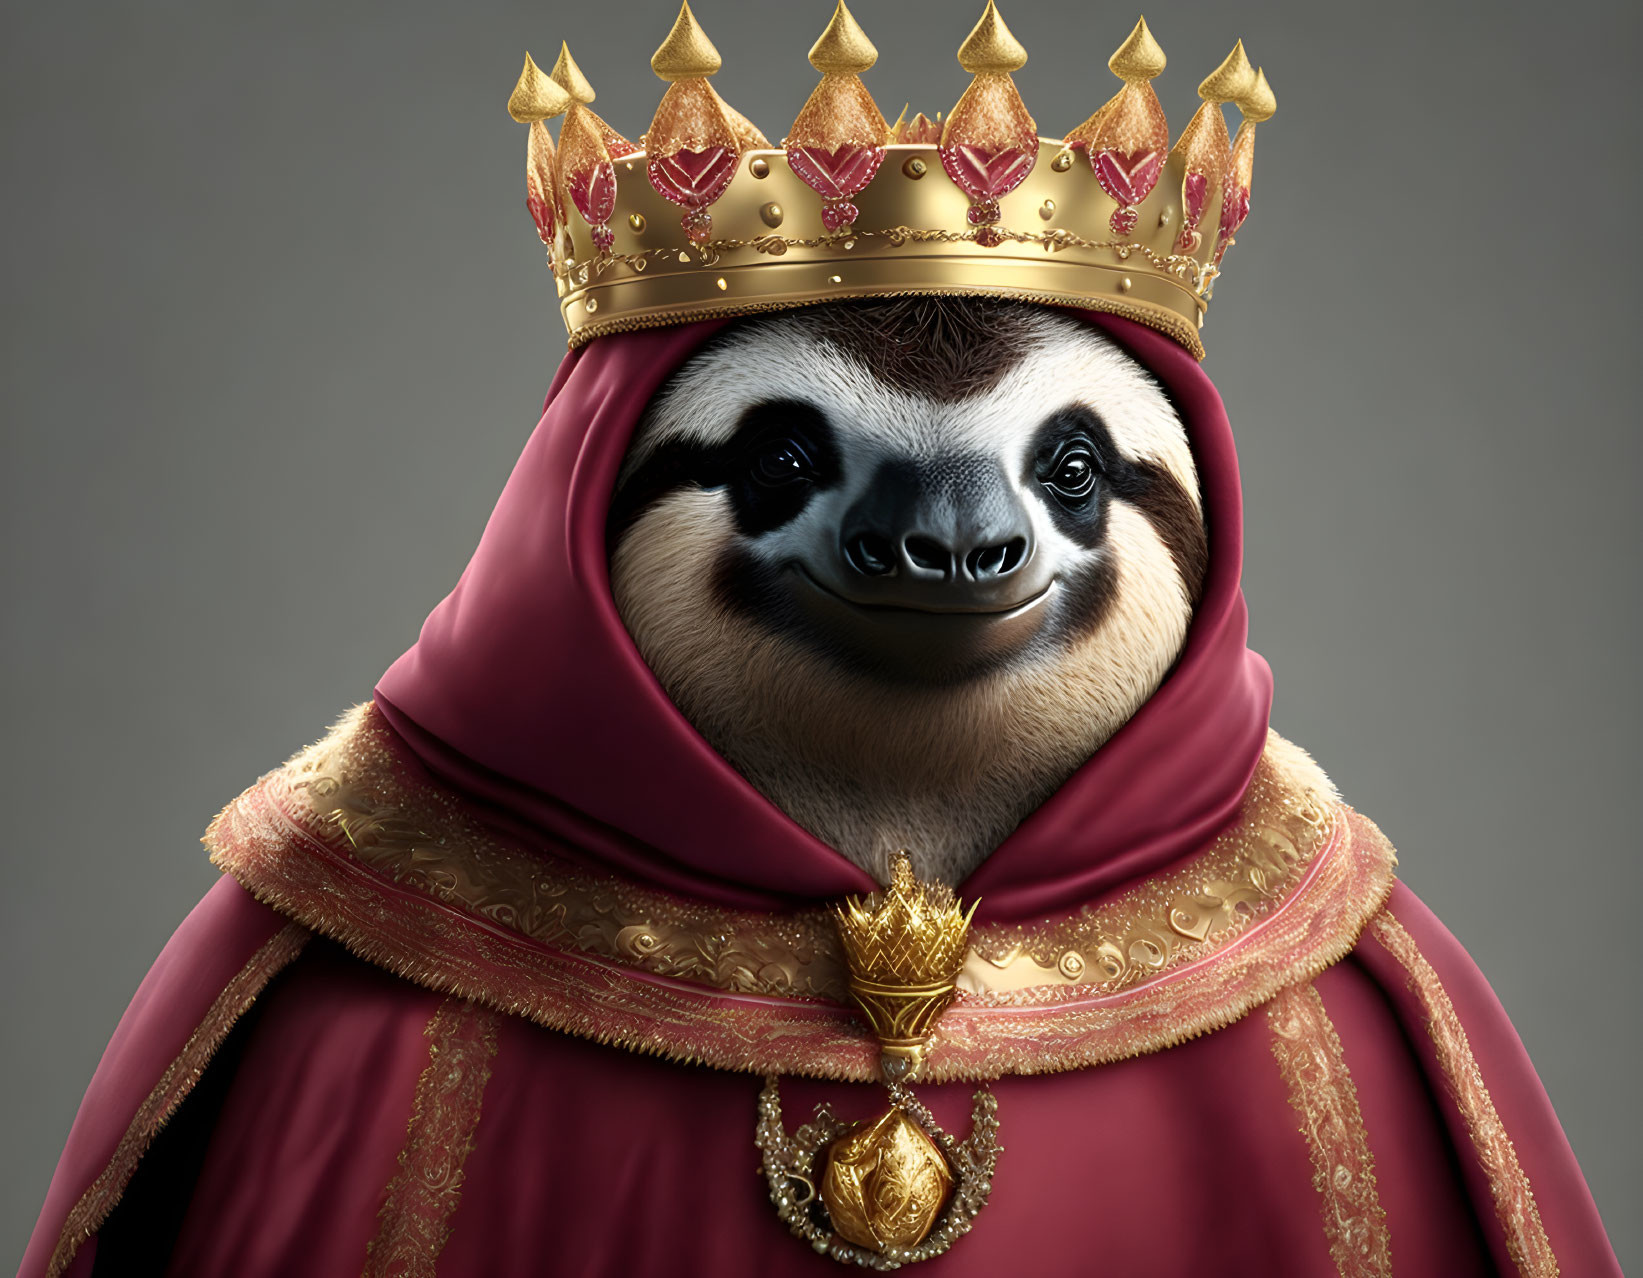 Regal sloth wearing golden crown and red robe